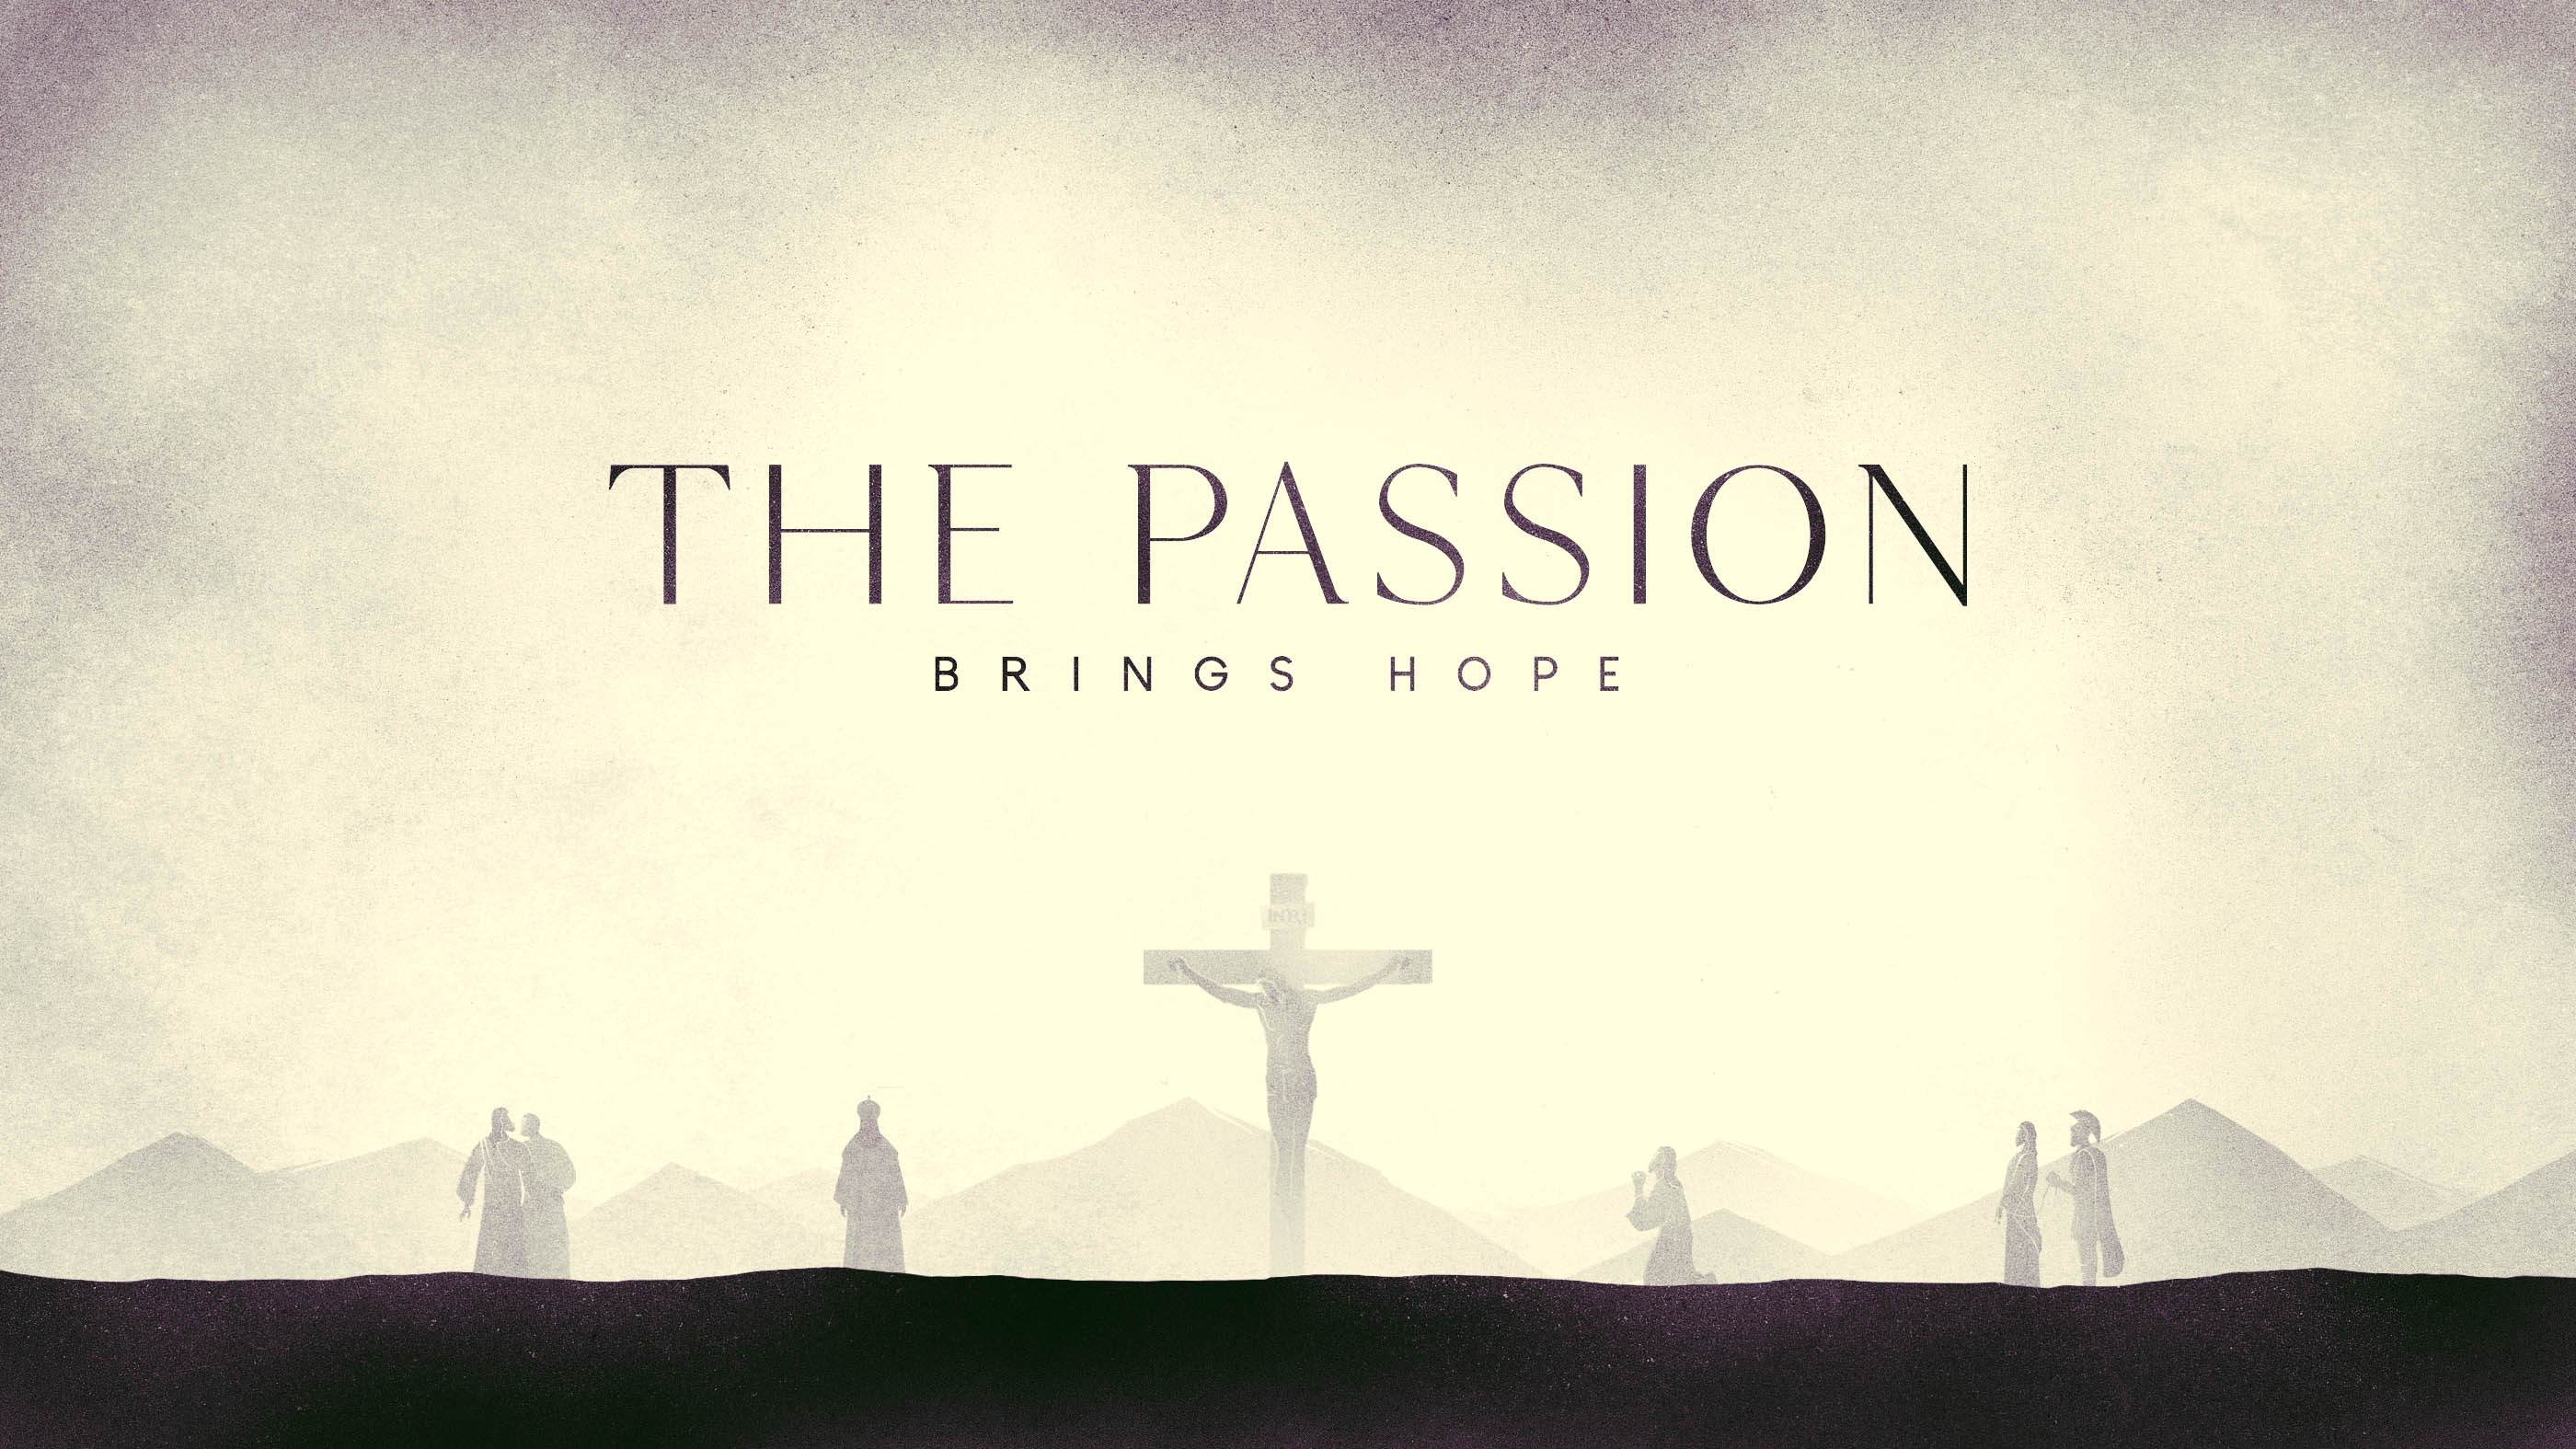 where can i watch passion of the christ free